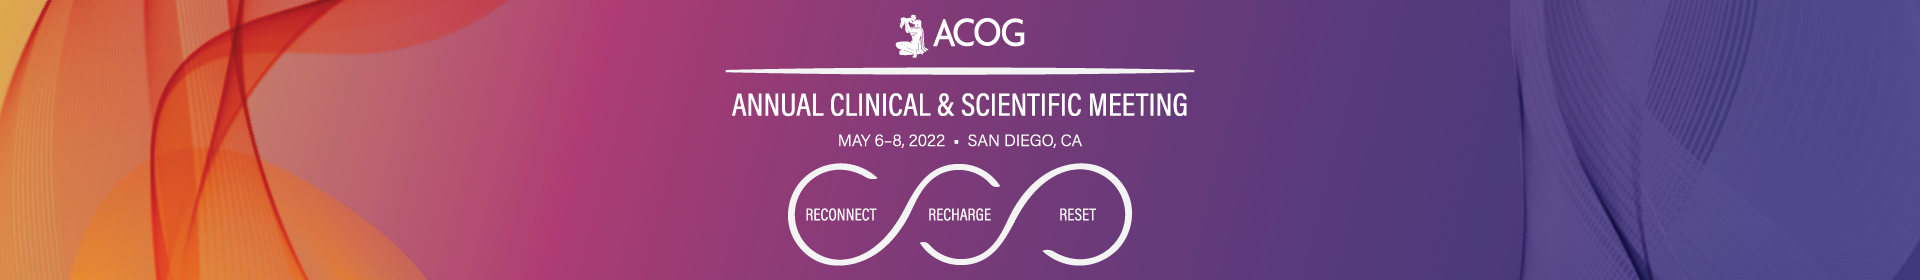 2021 ACOG Annual Meeting Abstract Submissions Event Banner